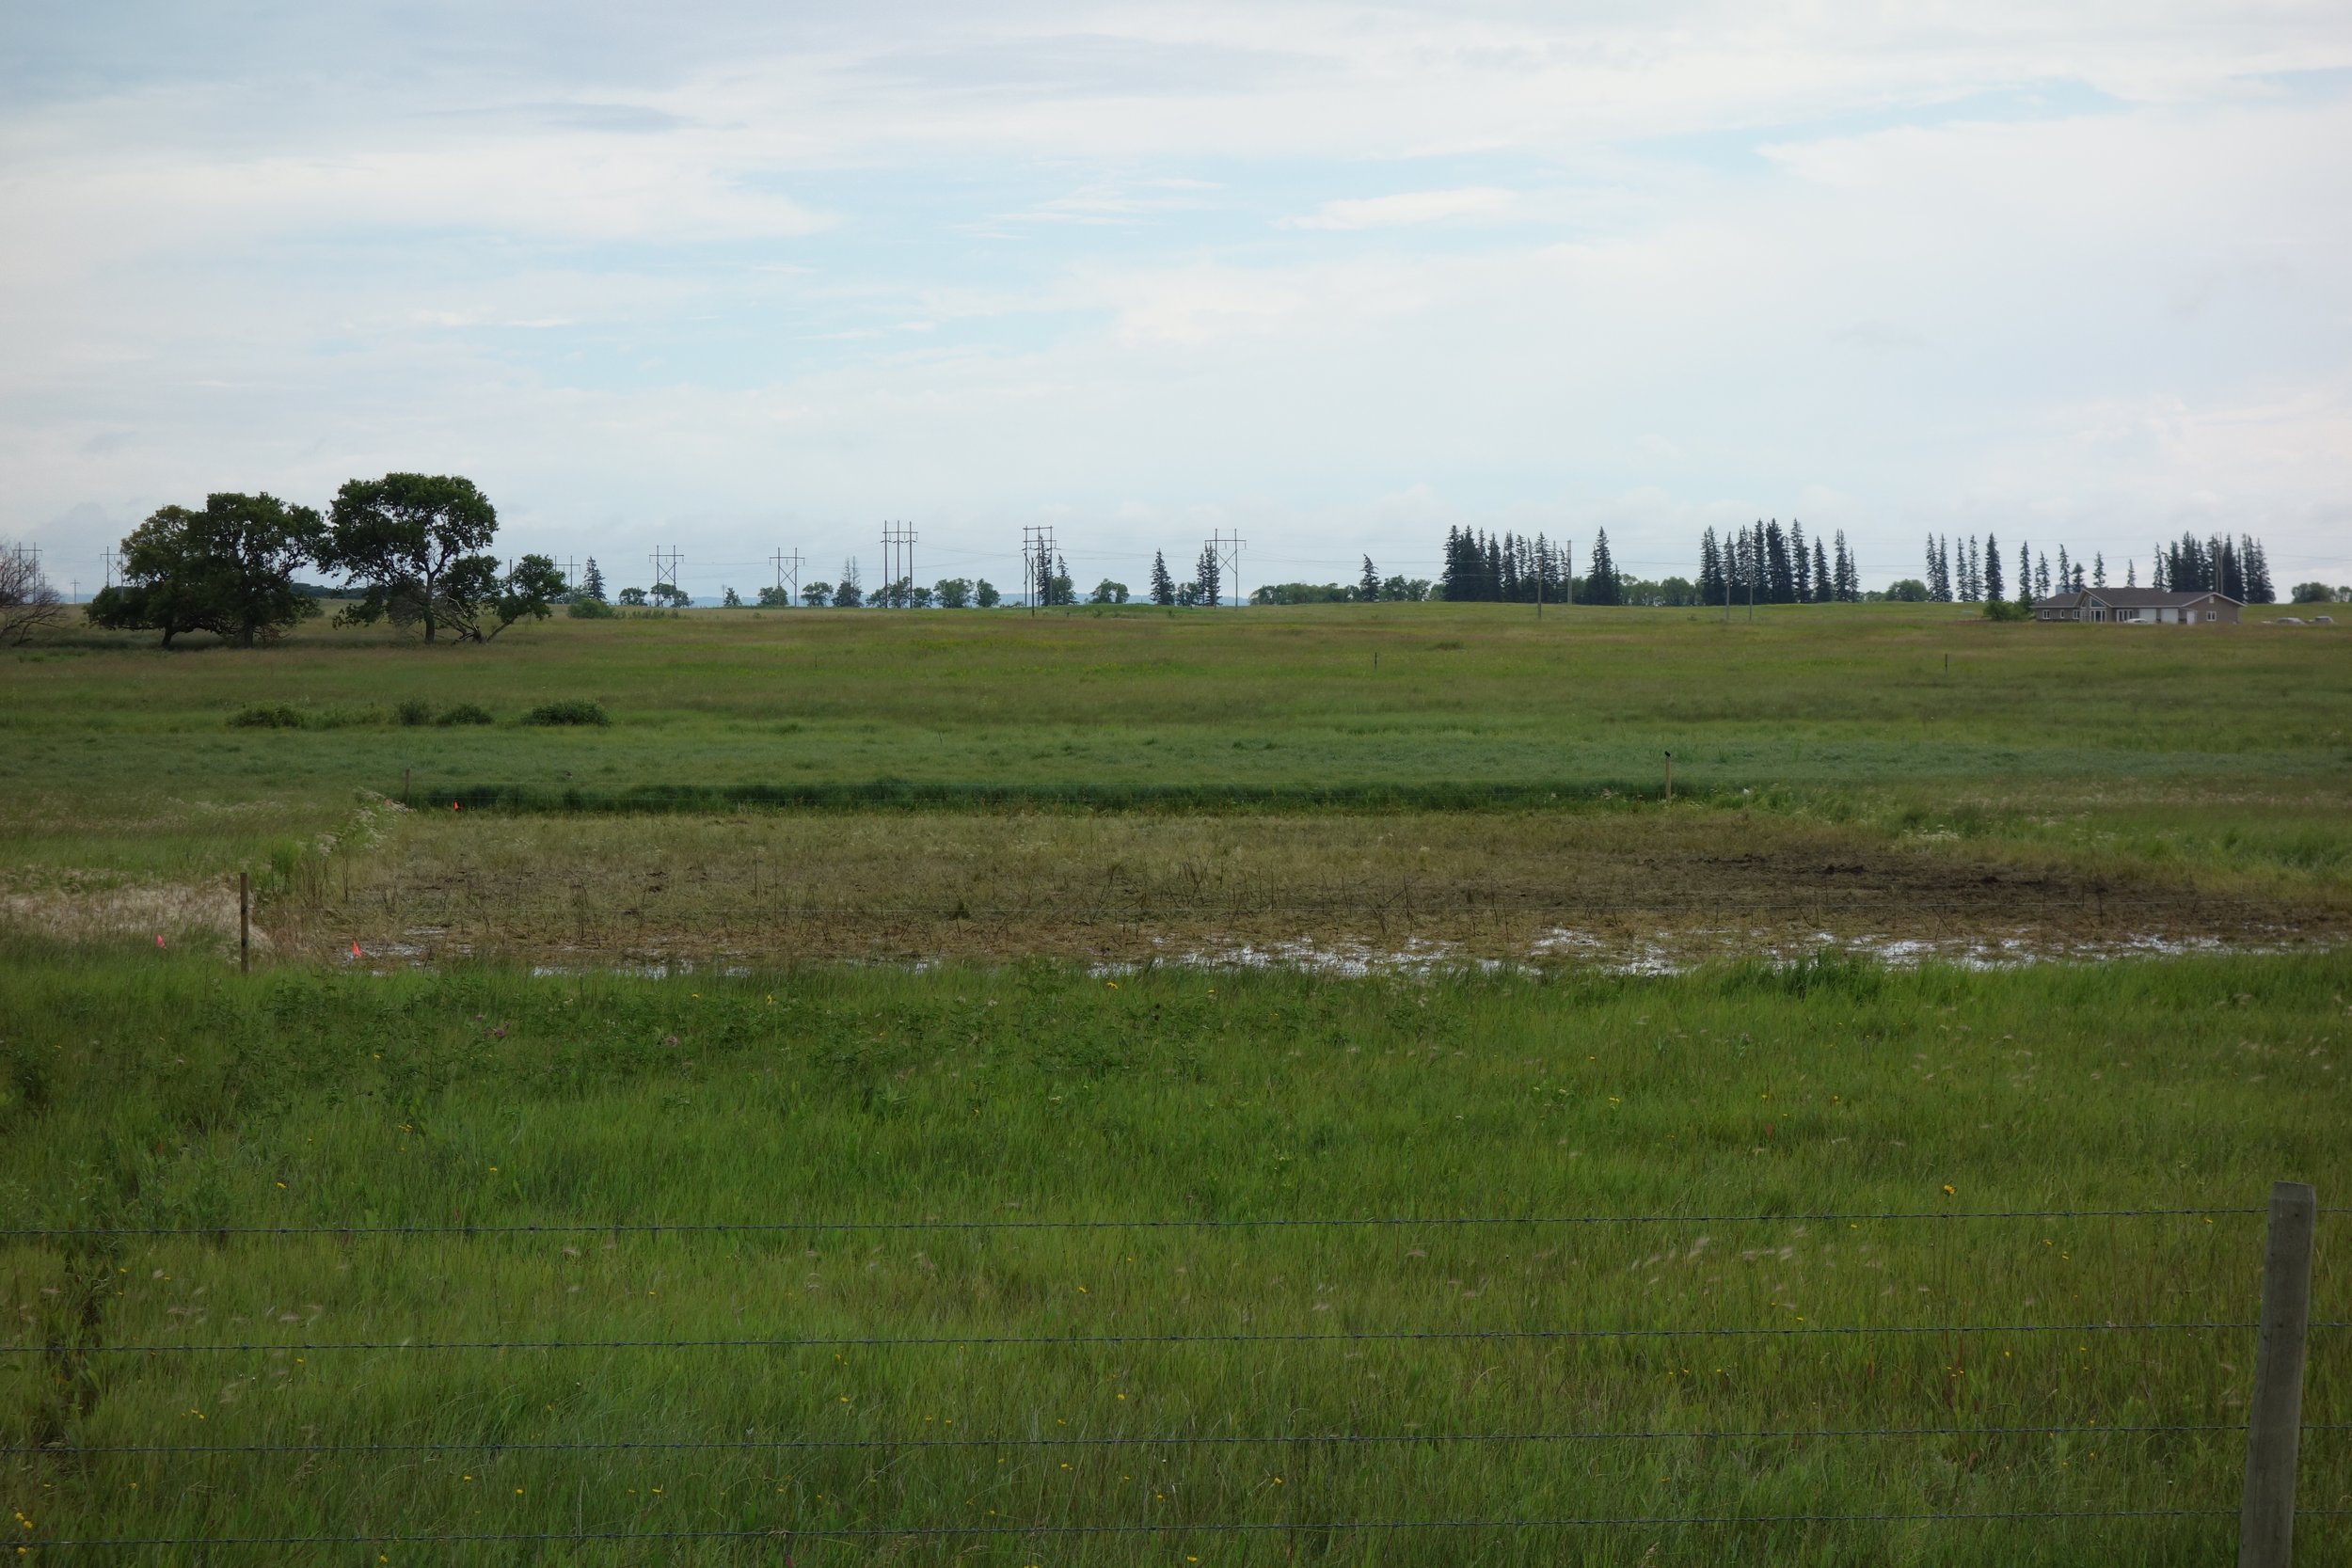 Wet meadow after grazing; treatment shown is high density grazing, early season